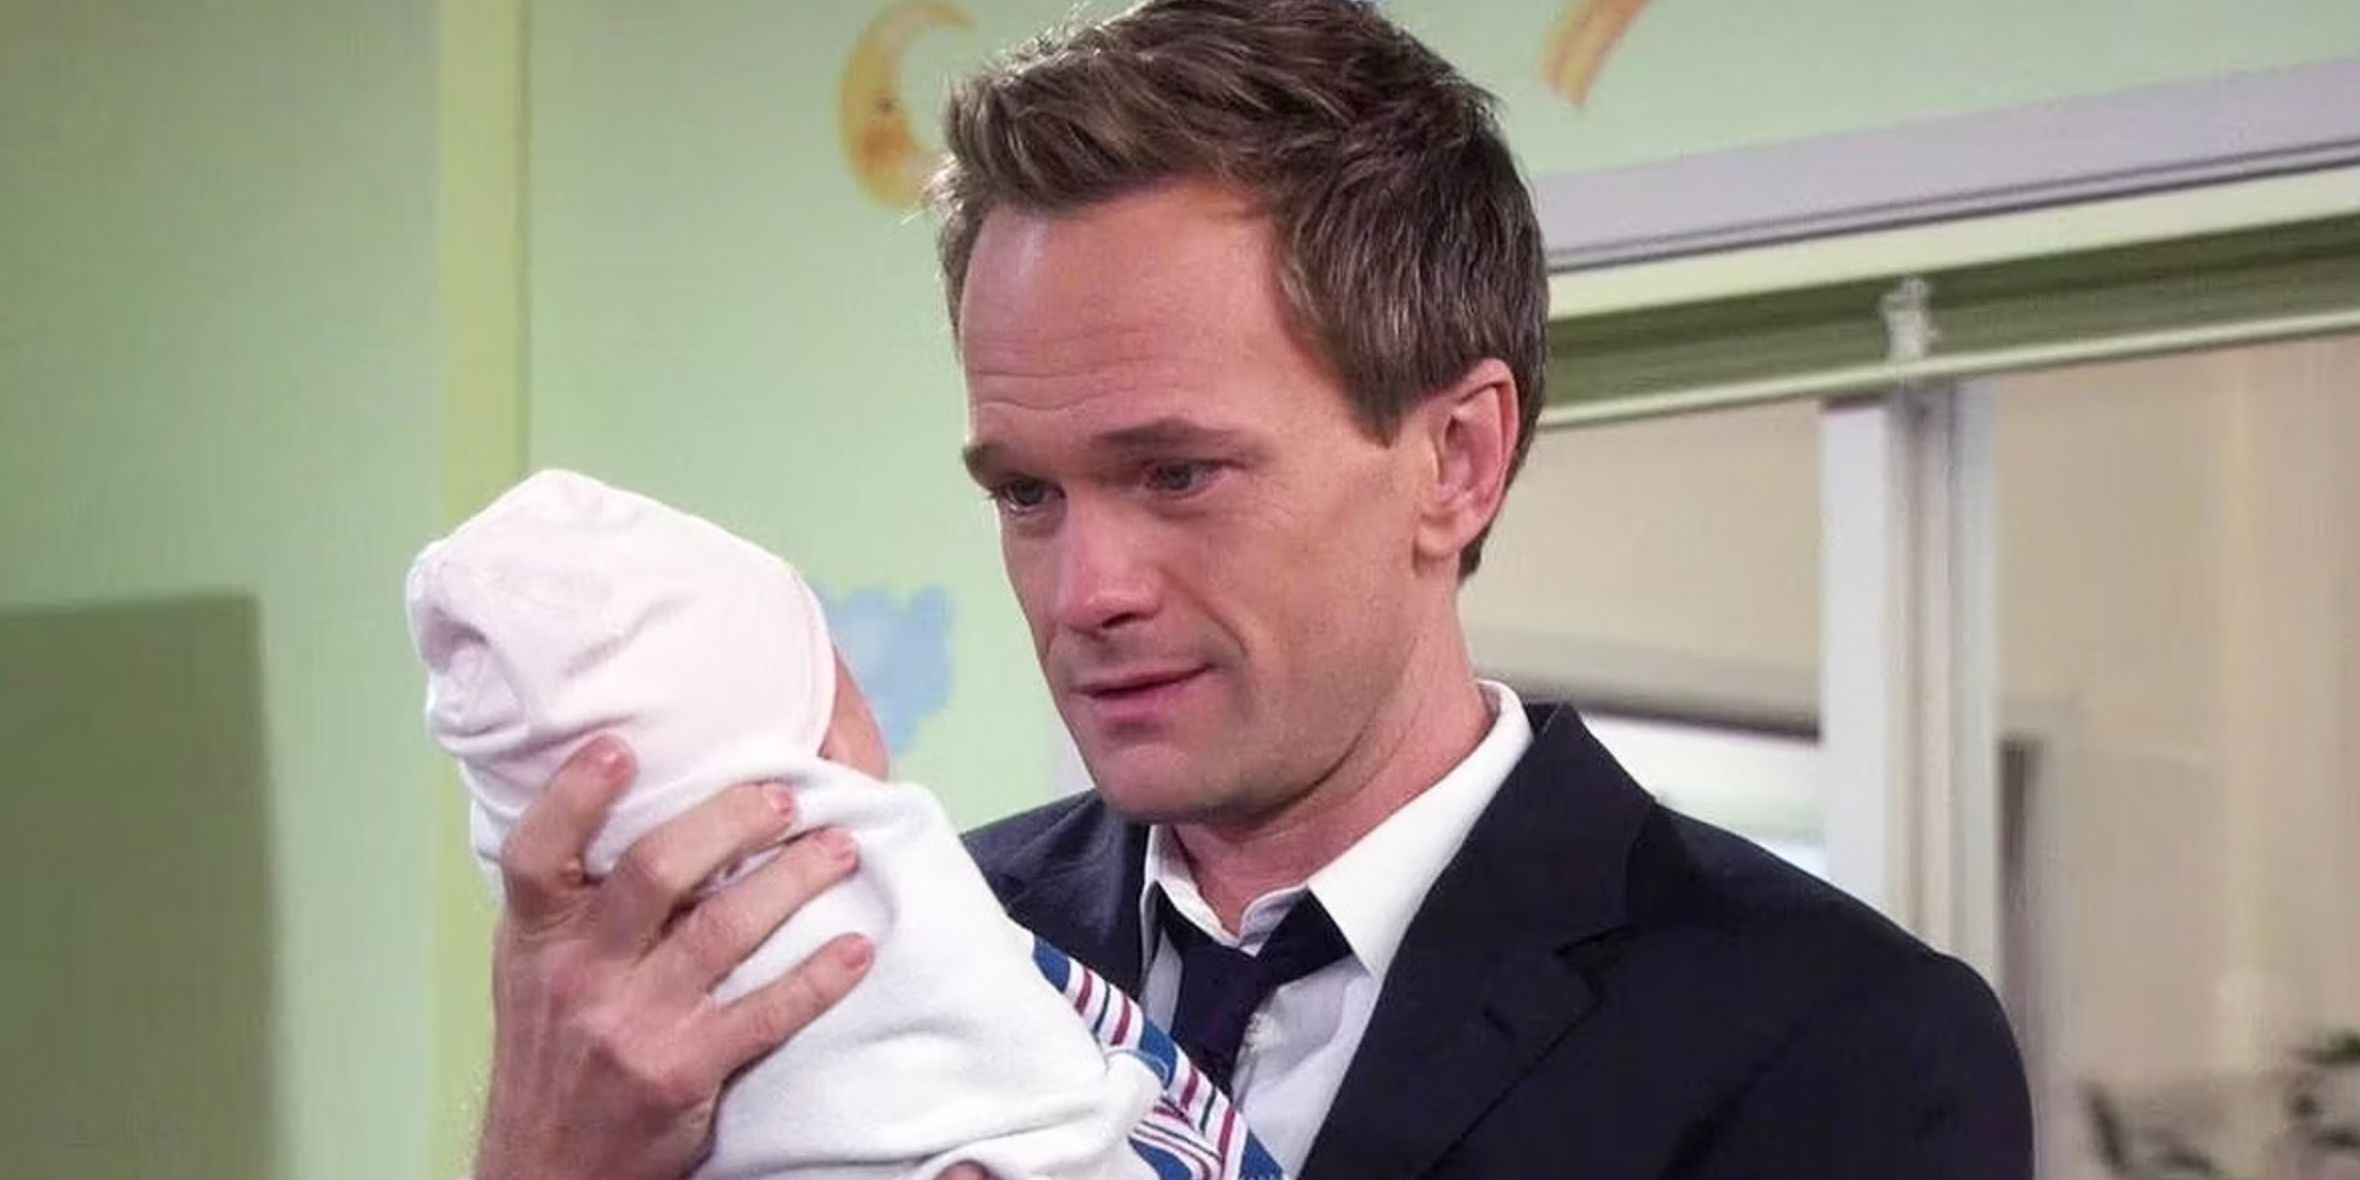 Barney tearing up while holding a baby in How I Met Your Mother